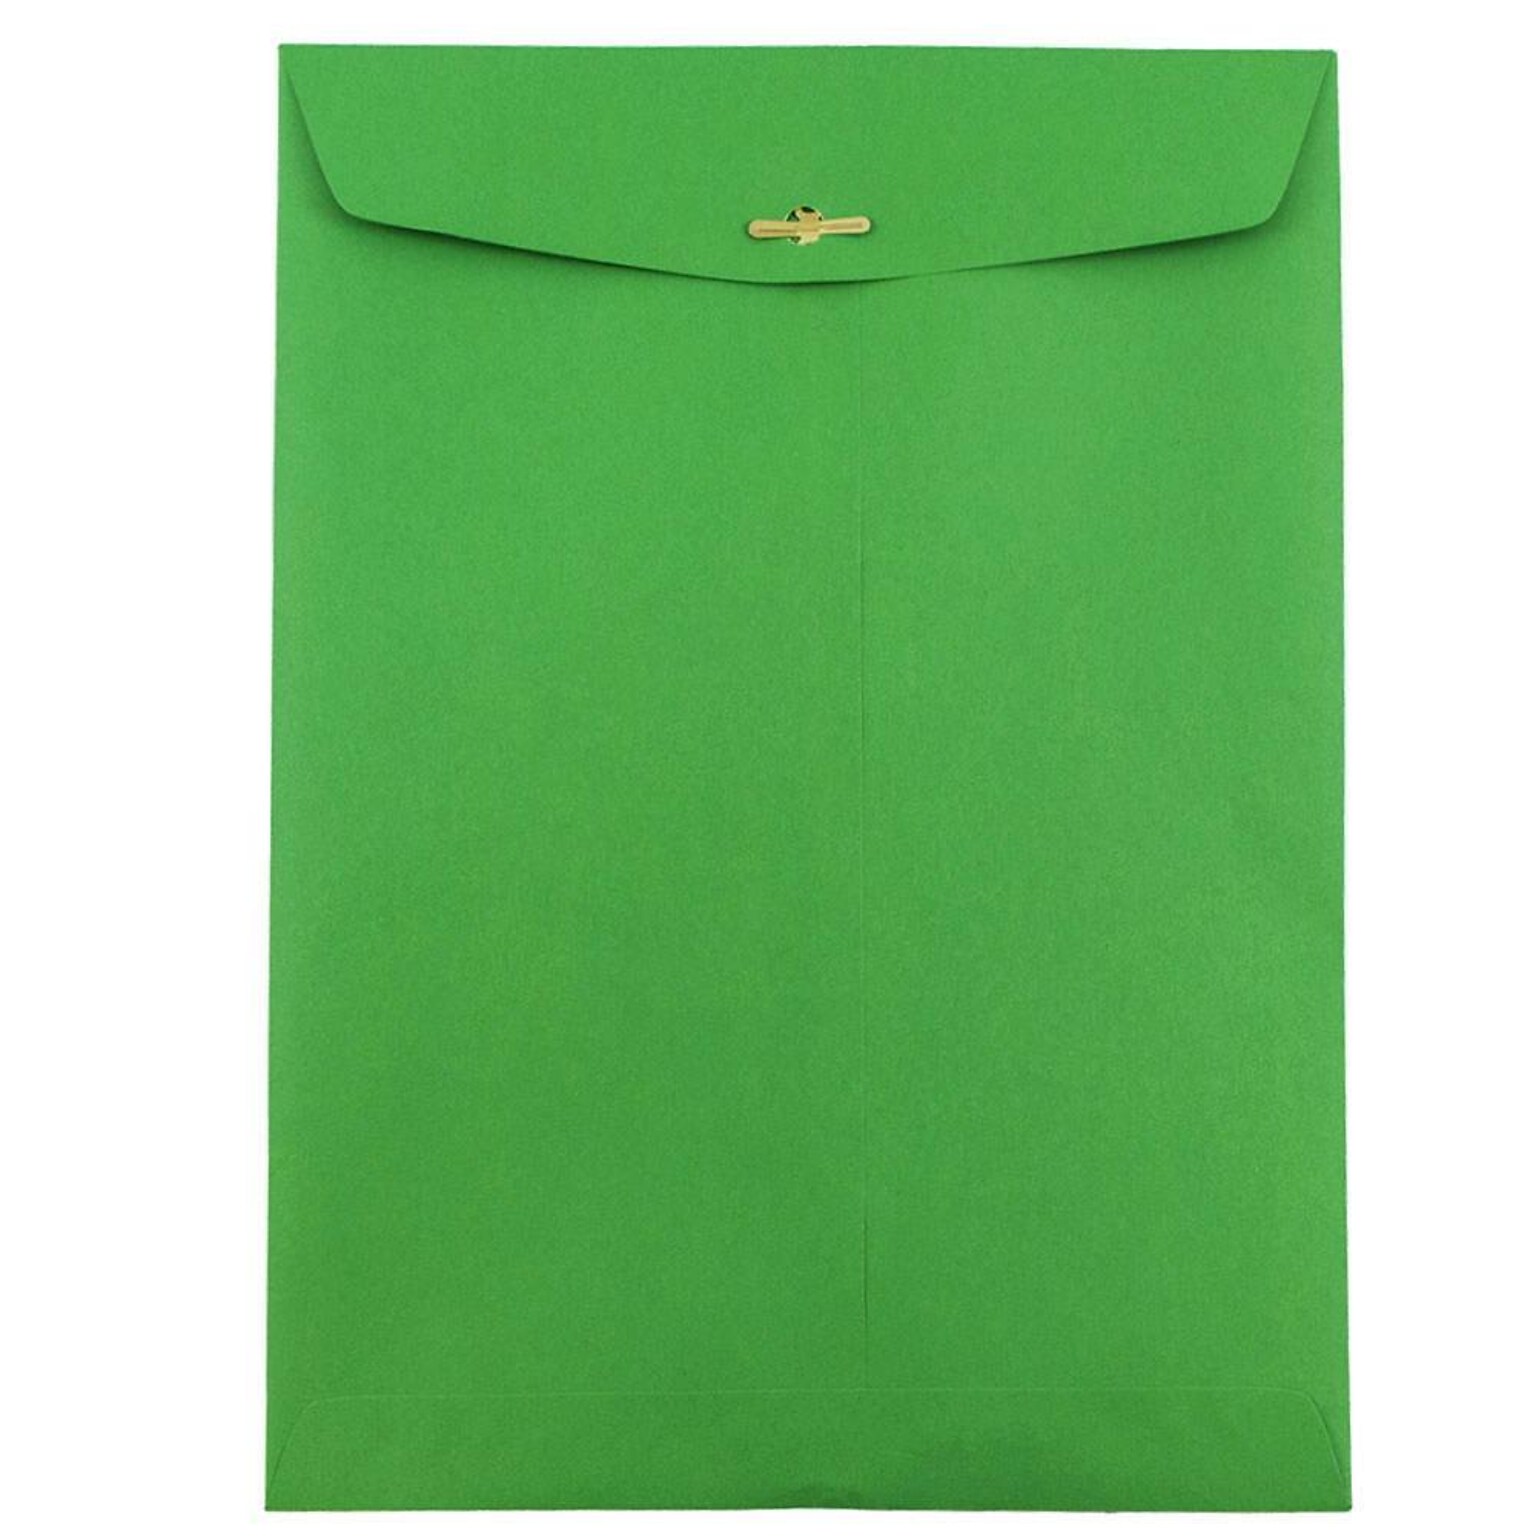 JAM Paper 9 x 12 Open End Catalog Colored Envelopes with Clasp Closure, Green Recycled, 10/Pack (92912B)